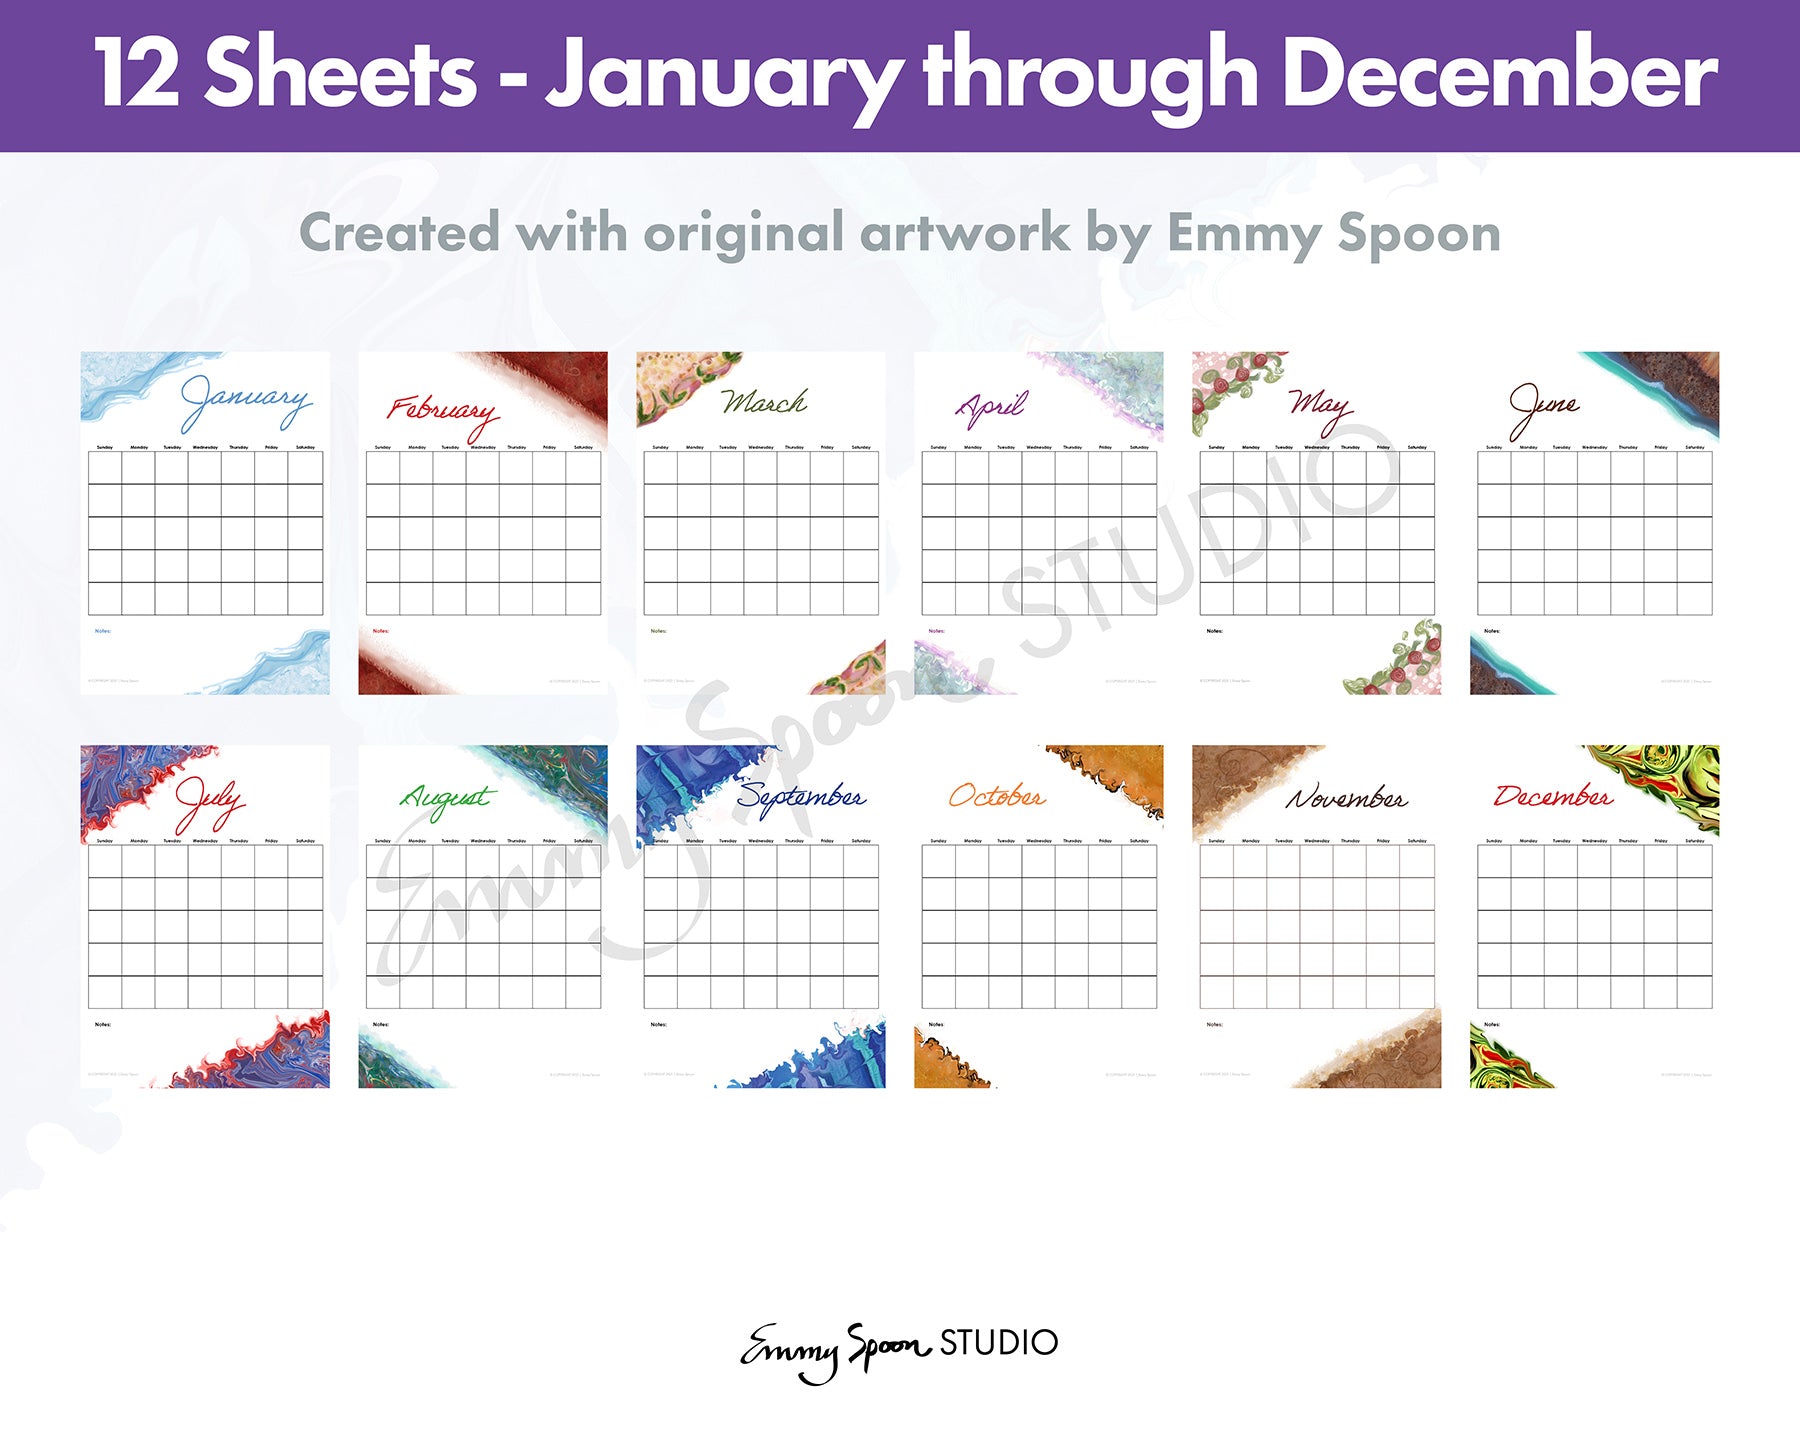 12 Sheets - January through December. Created with original artwork by Emmy Spoon.